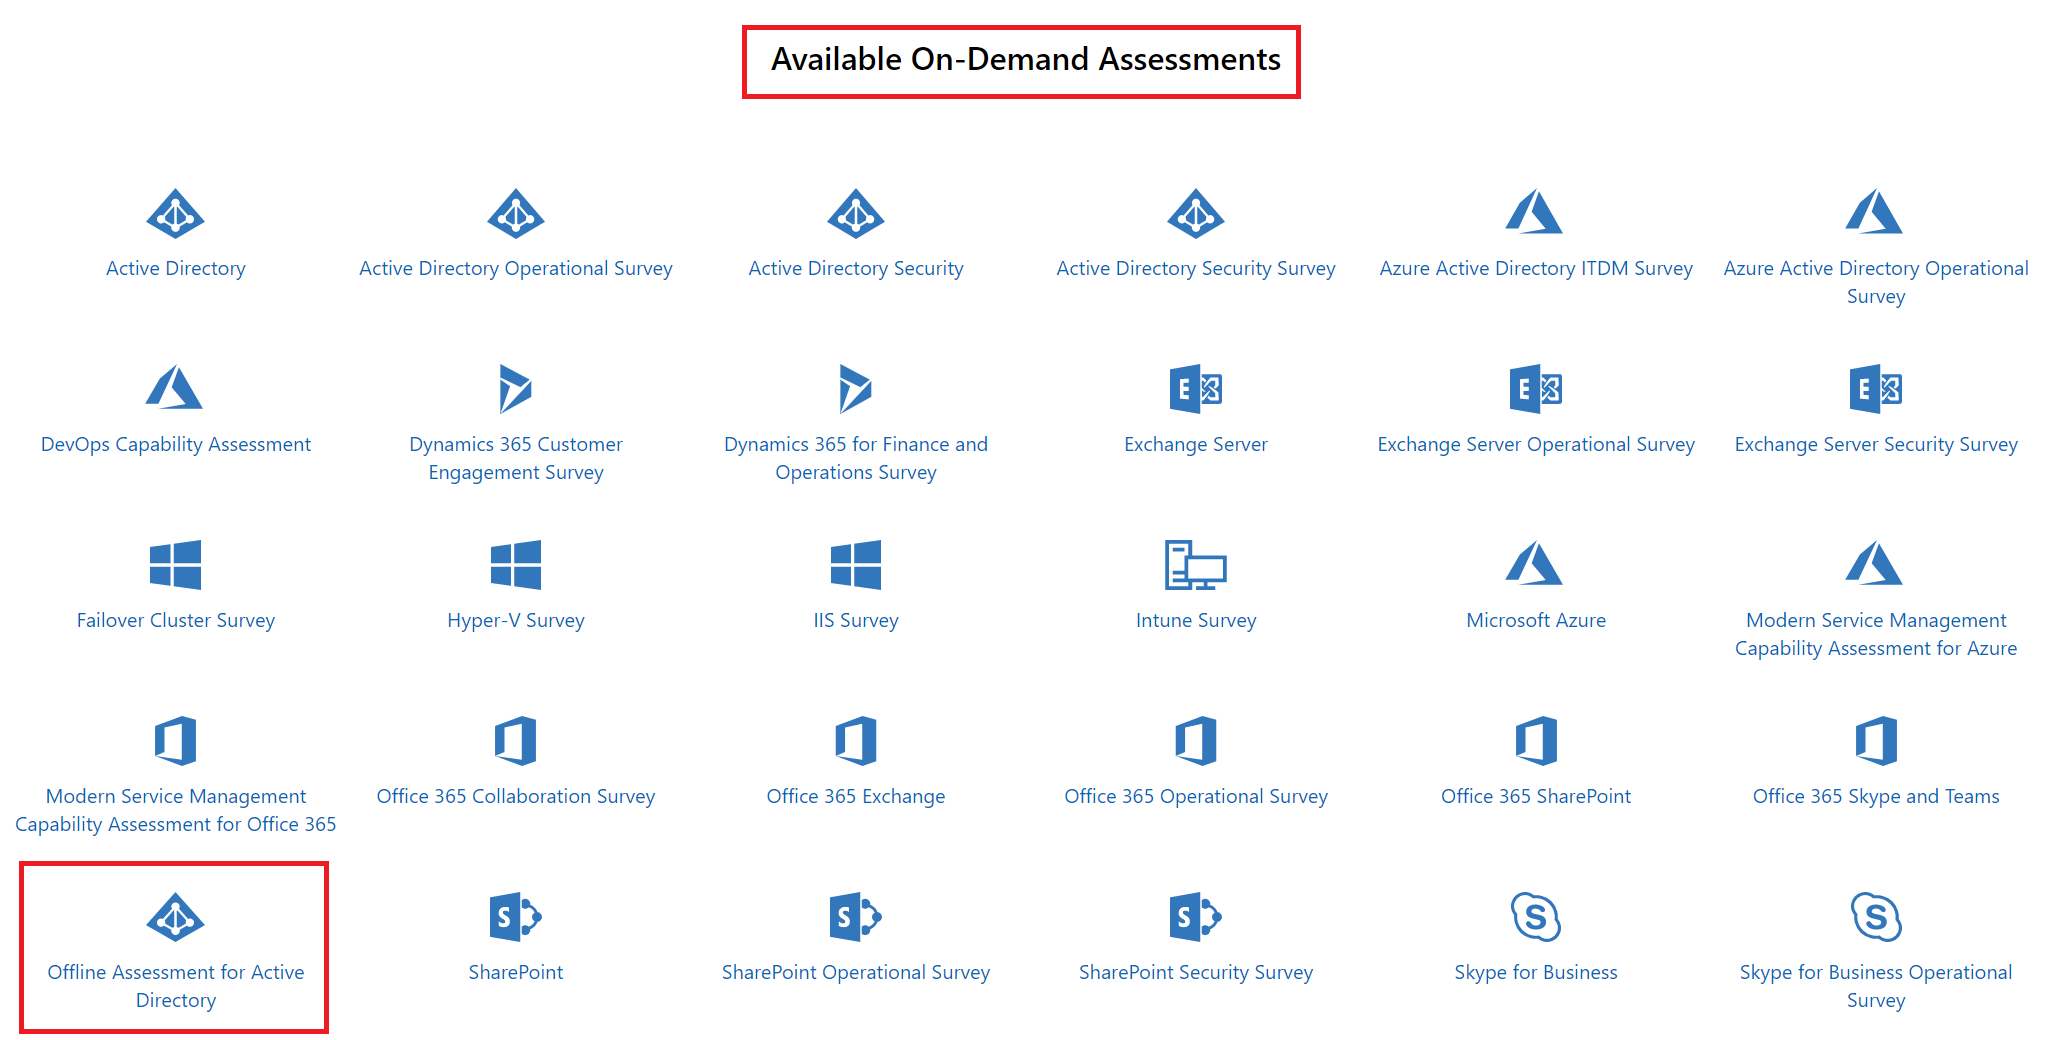 The Available On-Demand Assessments page with Offline Assessment for Active Directory highlighted.